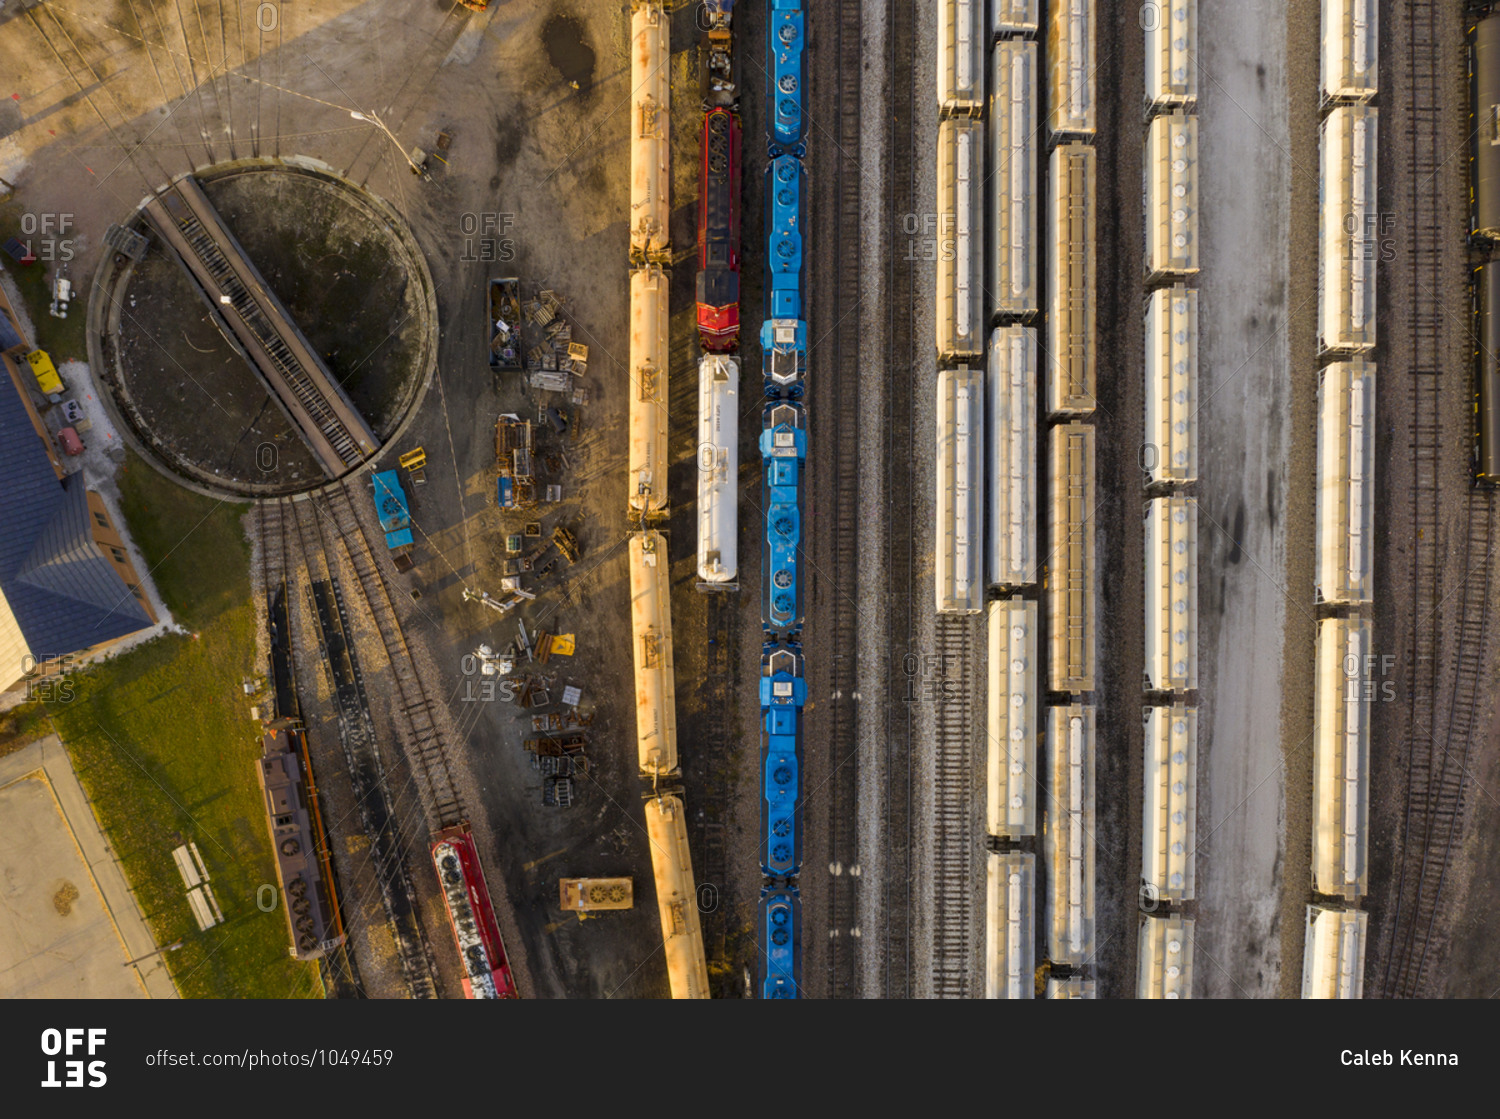 Drone shot over railway station and train cars in Burlington, Vermont